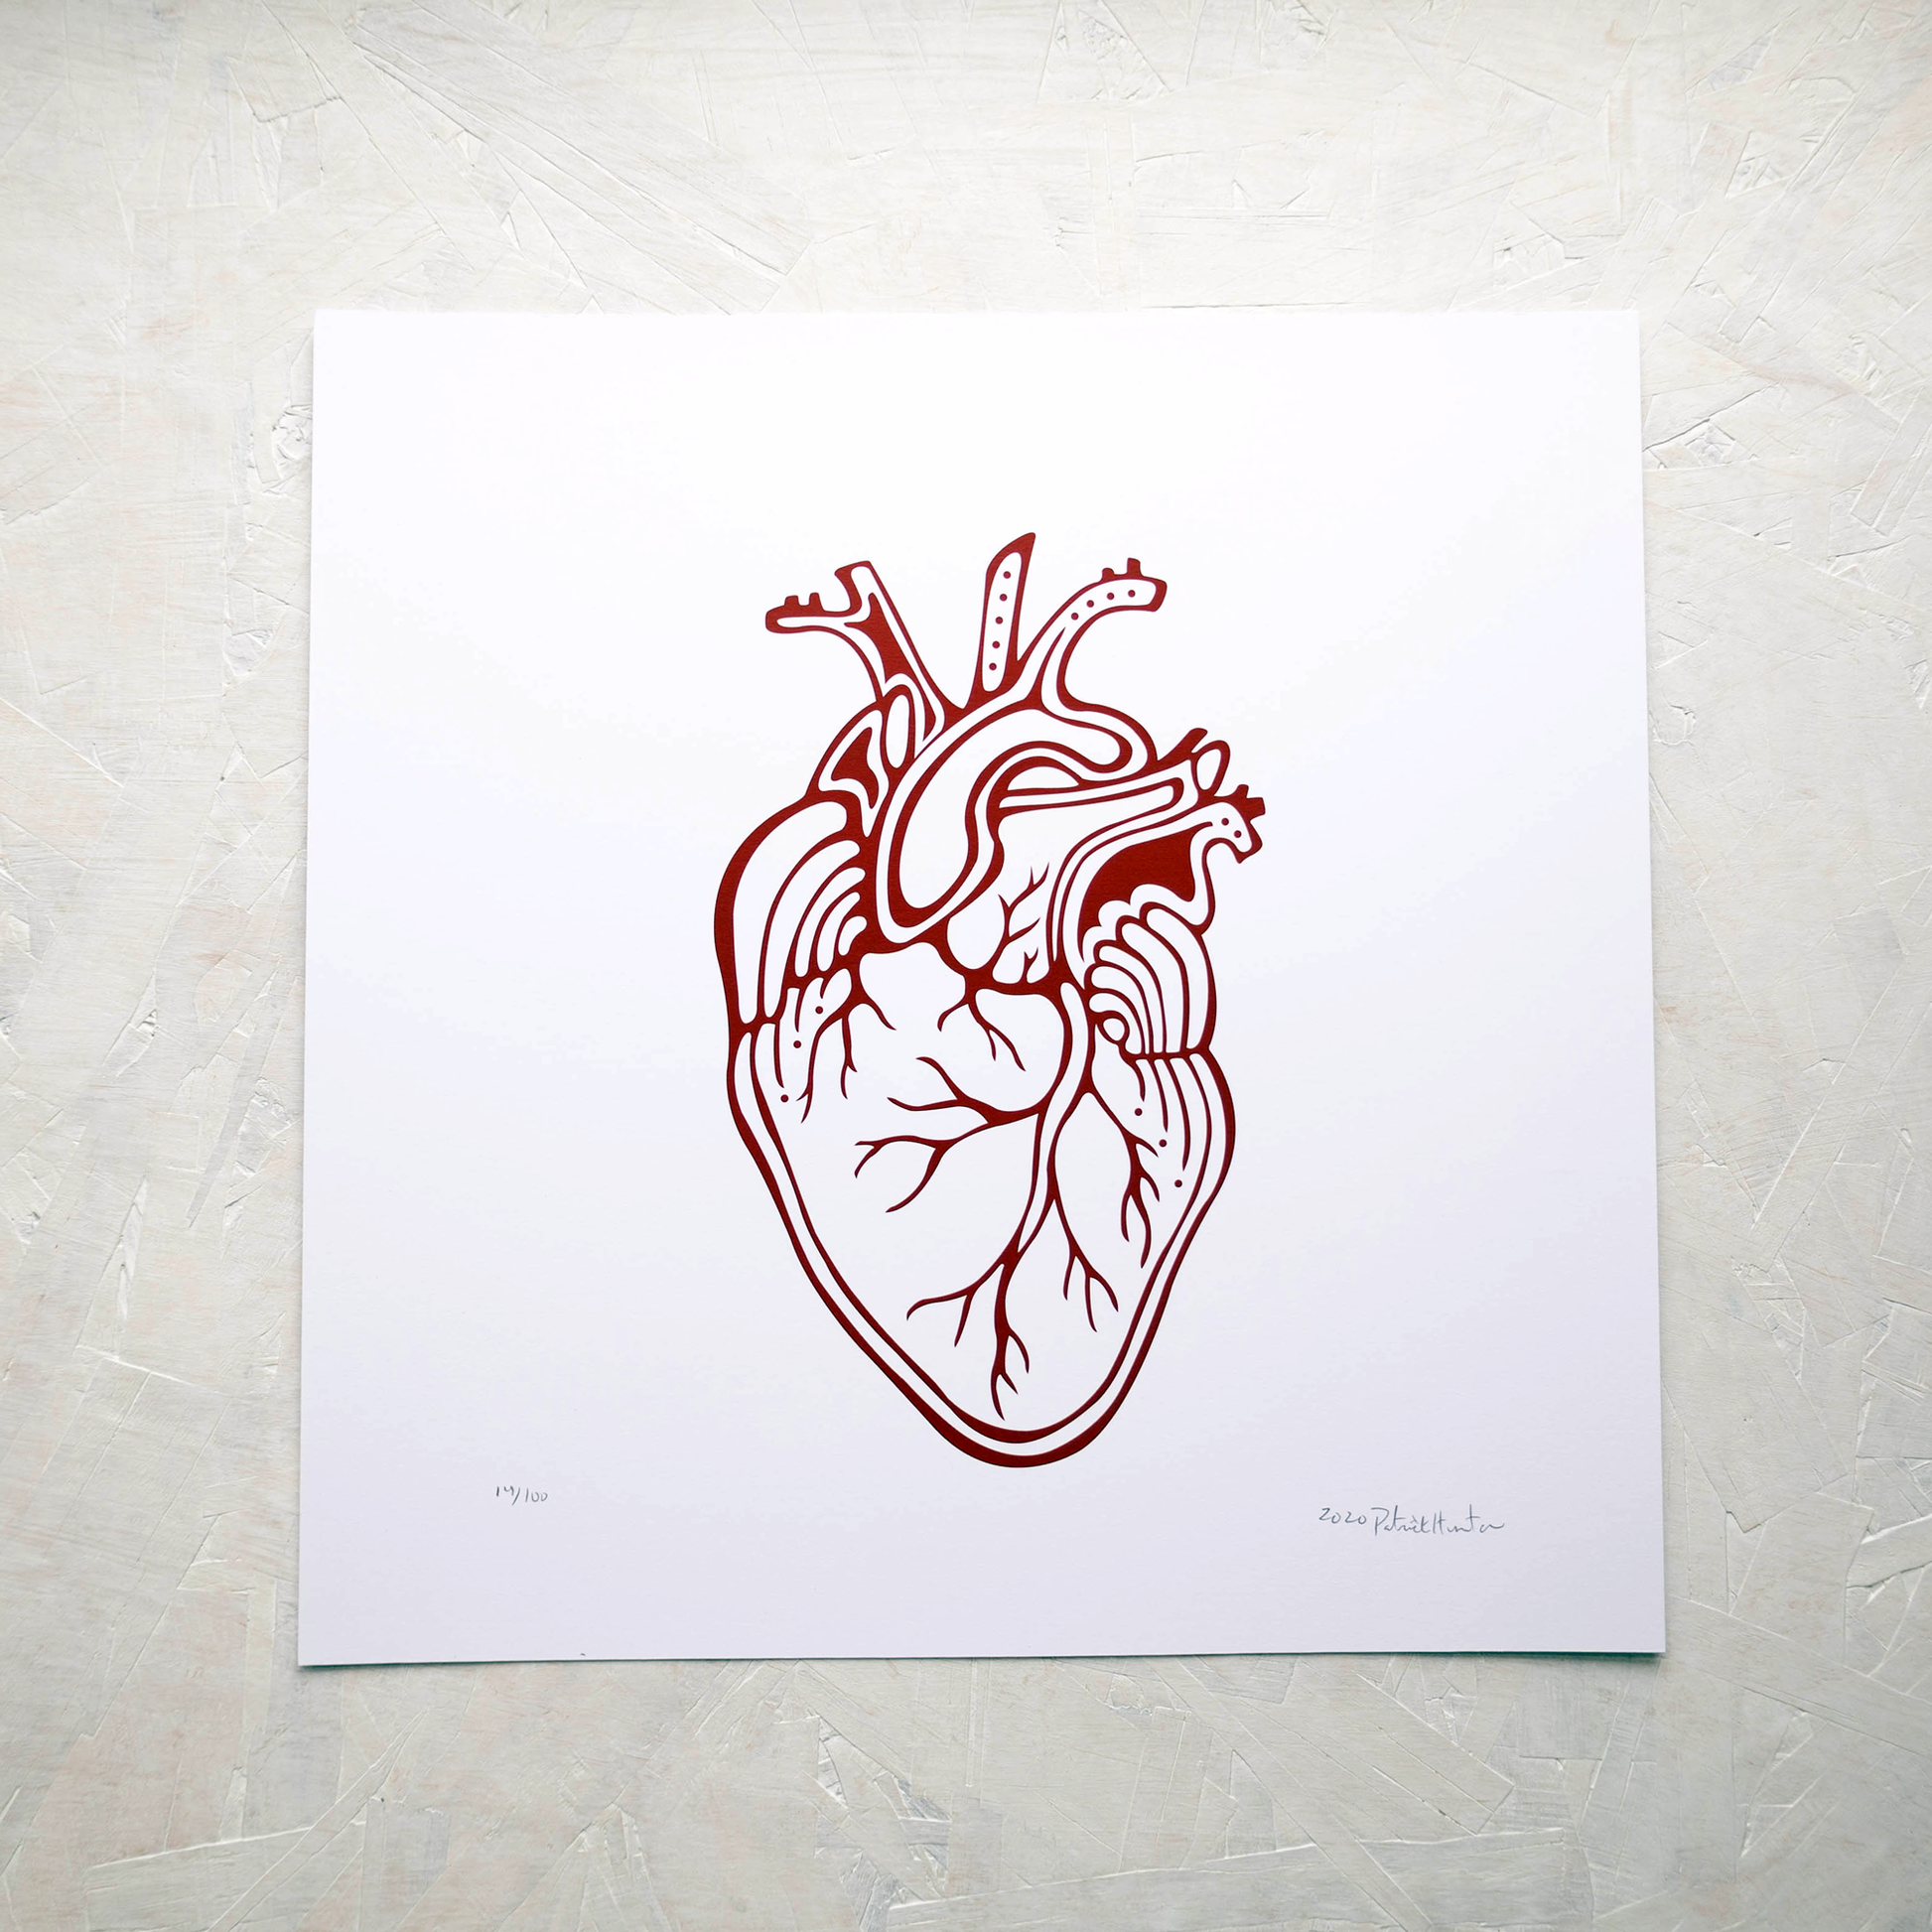 Print of Patrick Hunter's painting of an anatomical heart in red and white, woodland art style.